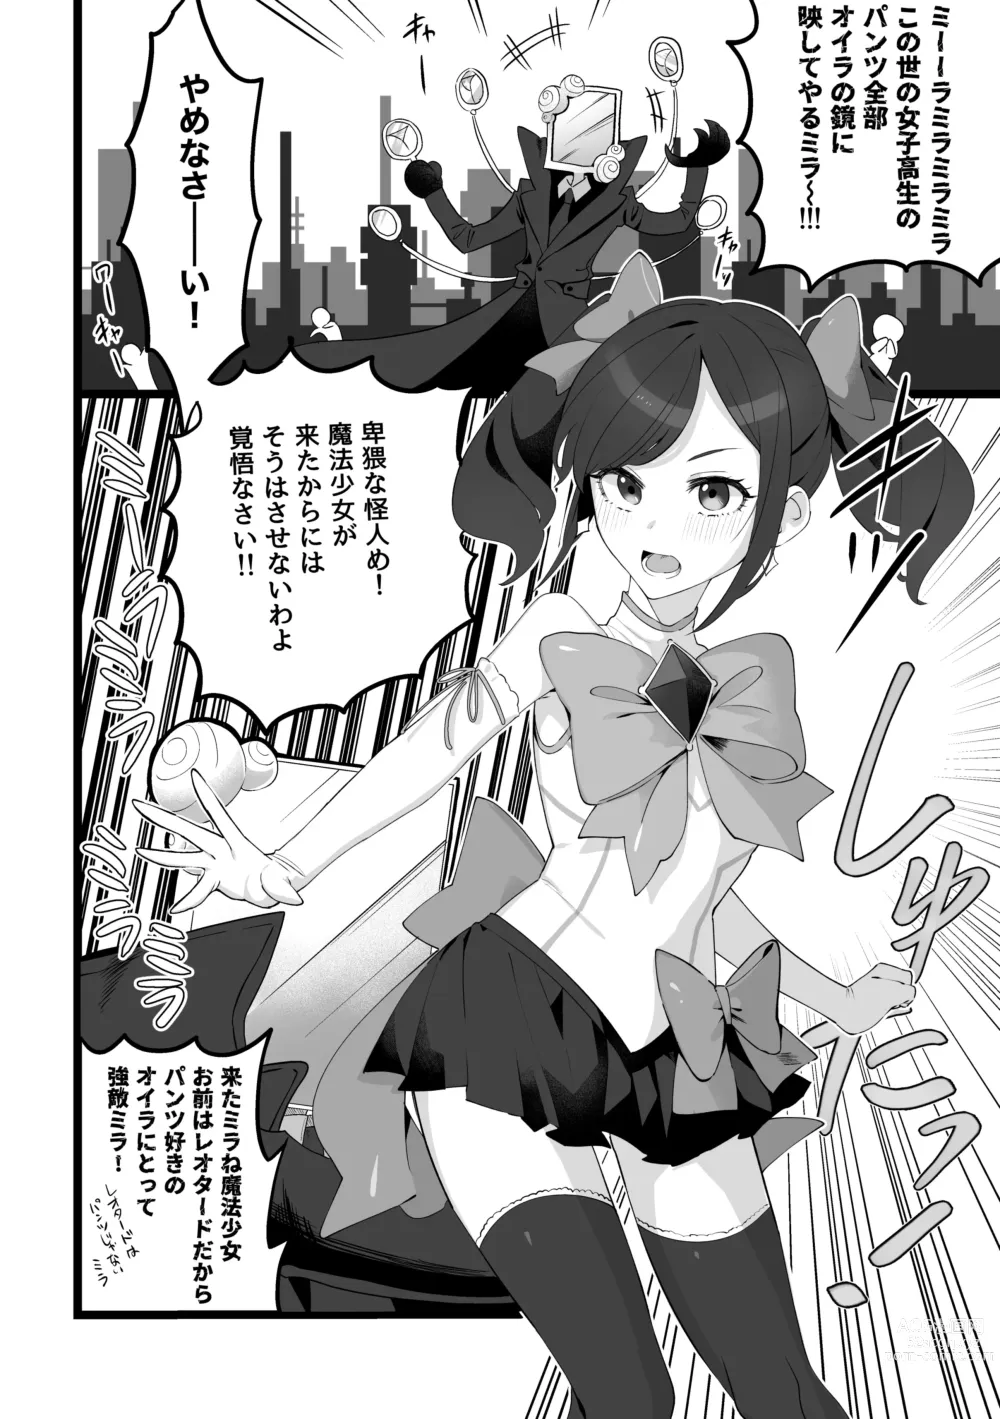 Page 1 of doujinshi Defeated Magical girl